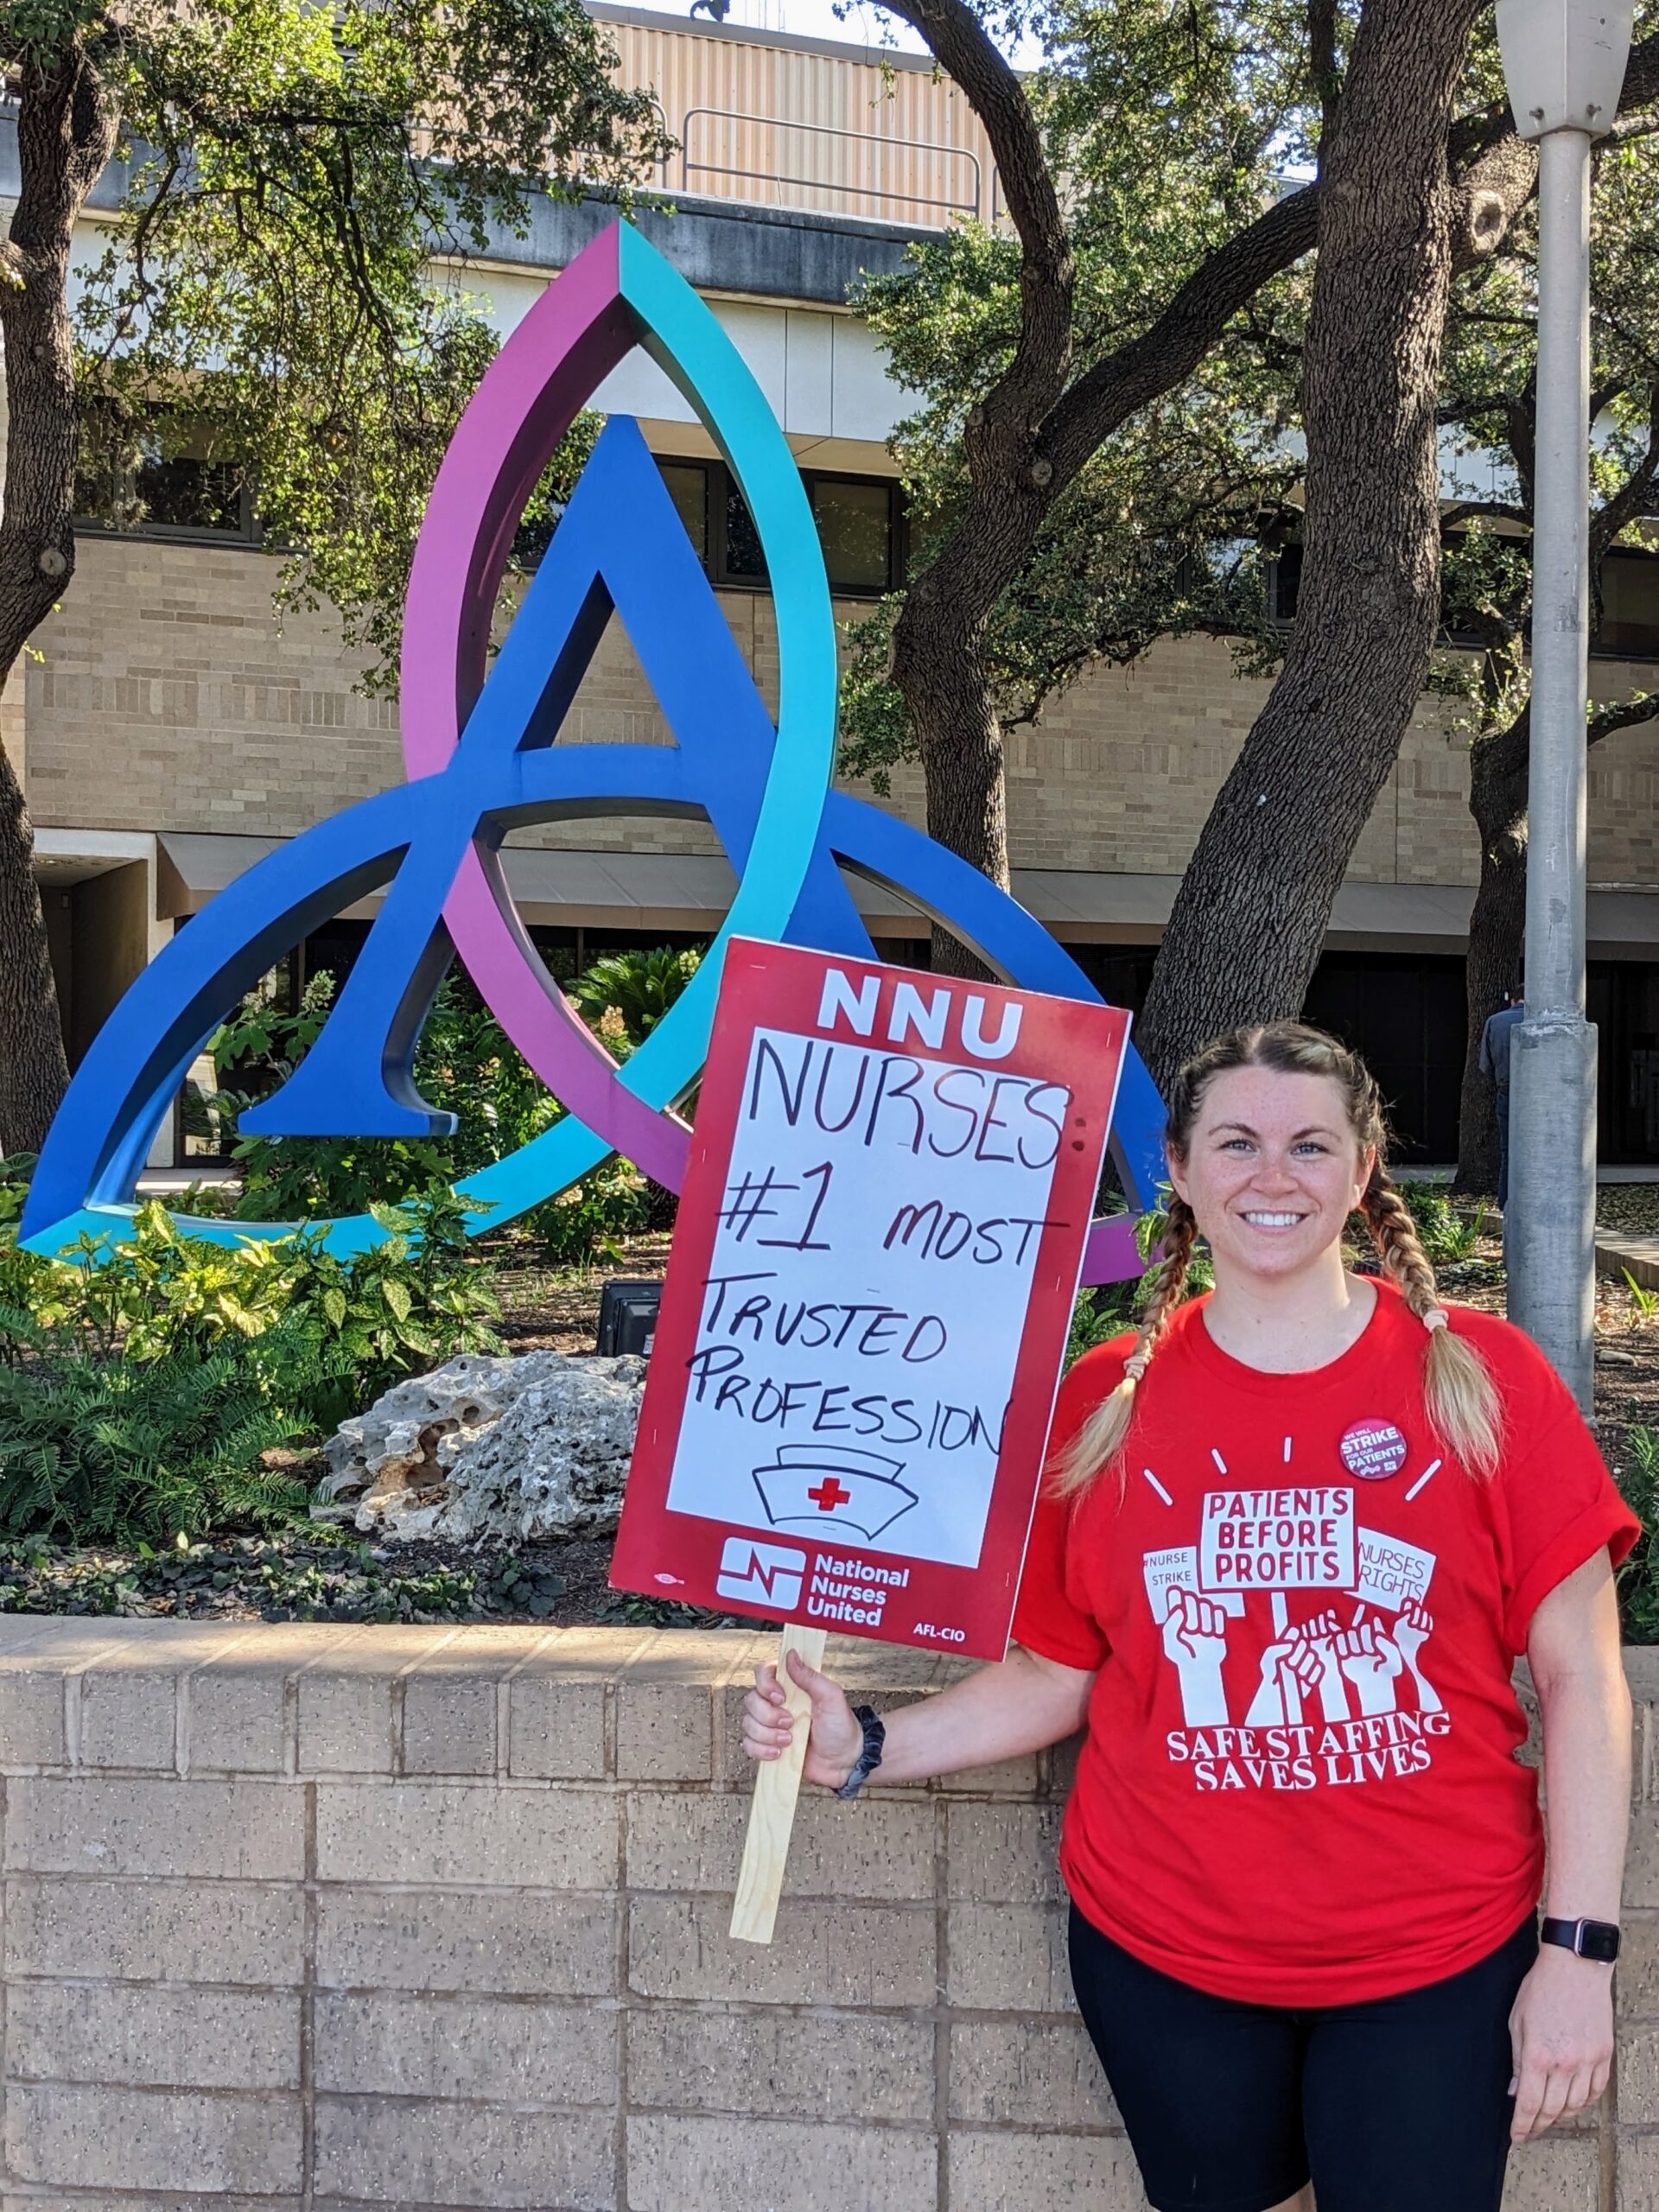 Jessica Gripentrog is a white woman in pig tails, standing in front of the Ascension Seton logo sculpture at the medical center during the nurses strike. She is wearing a National Nurses United red t-shirt and holding a sign that declares nurses to be the number one most trusted profession.